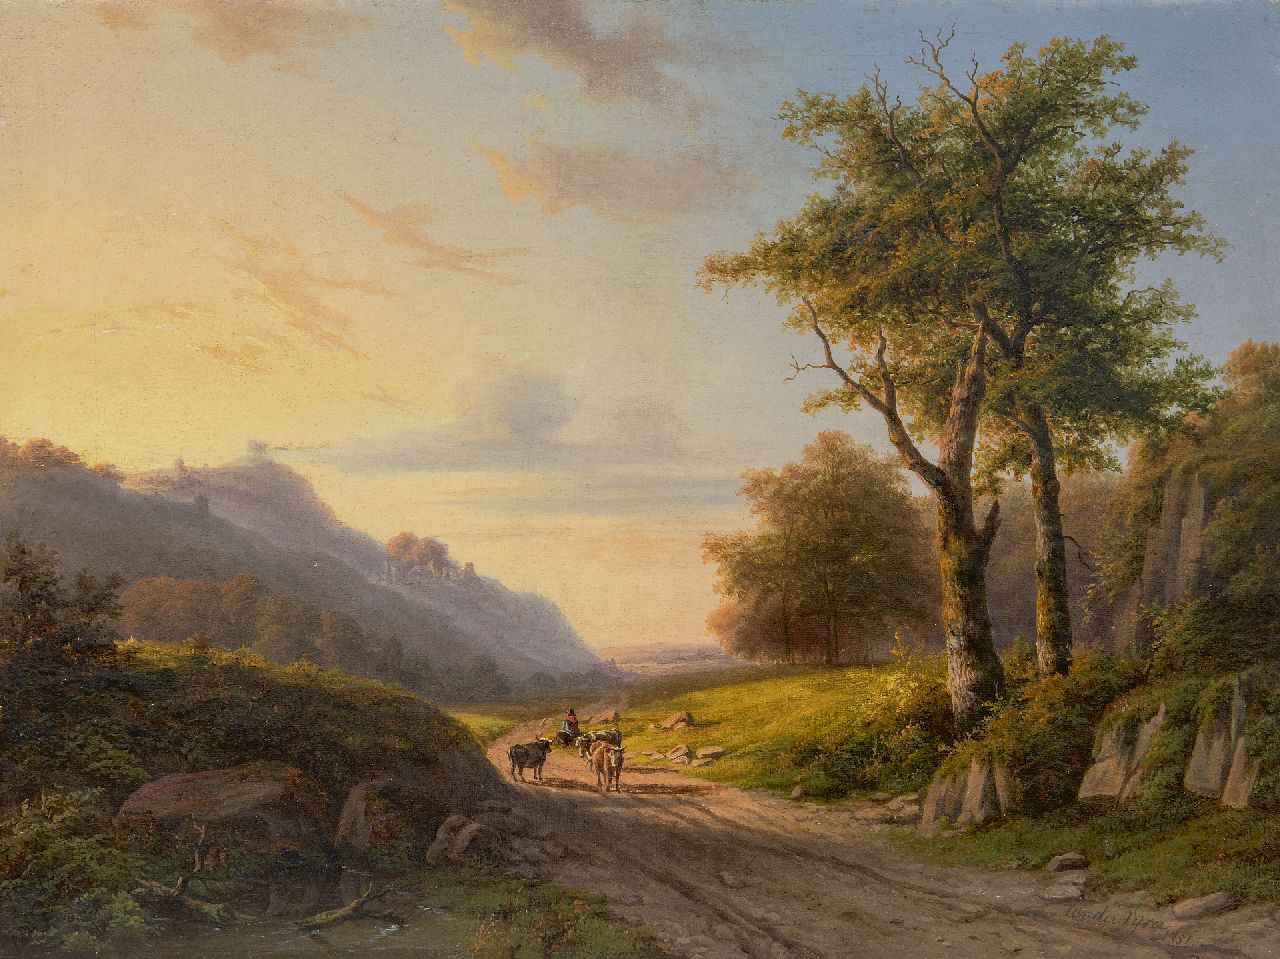 Vijver W.S.P. van der | Willem Simon Petrus van der Vijver | Paintings offered for sale | A hilly landscape with a cowherd at late afternoon, oil on canvas 39.6 x 52.5 cm, signed l.r. and dated 1851